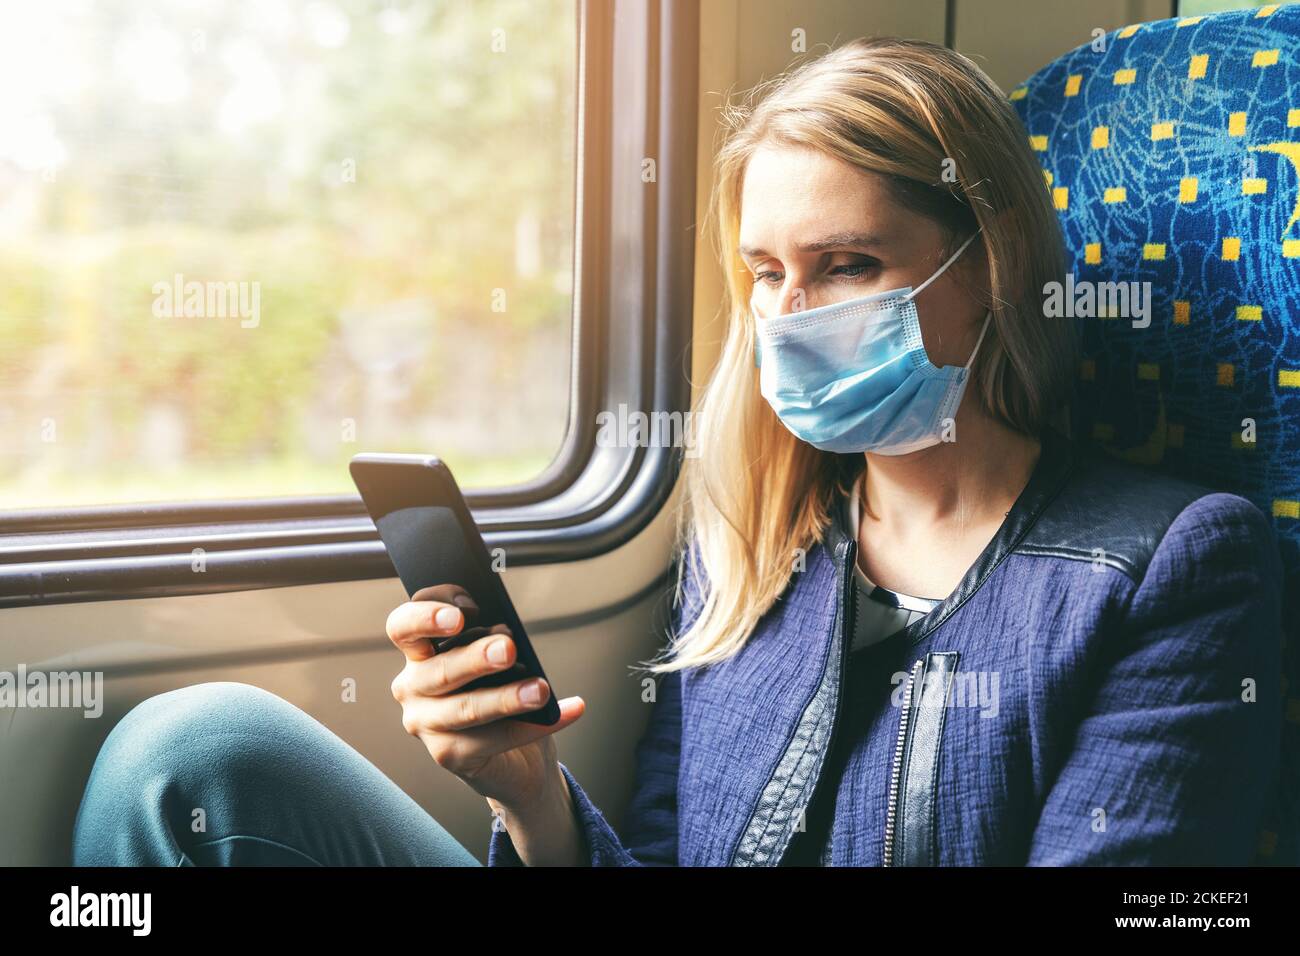 young woman with face mask using mobile phone in train. safety in public transport Stock Photo